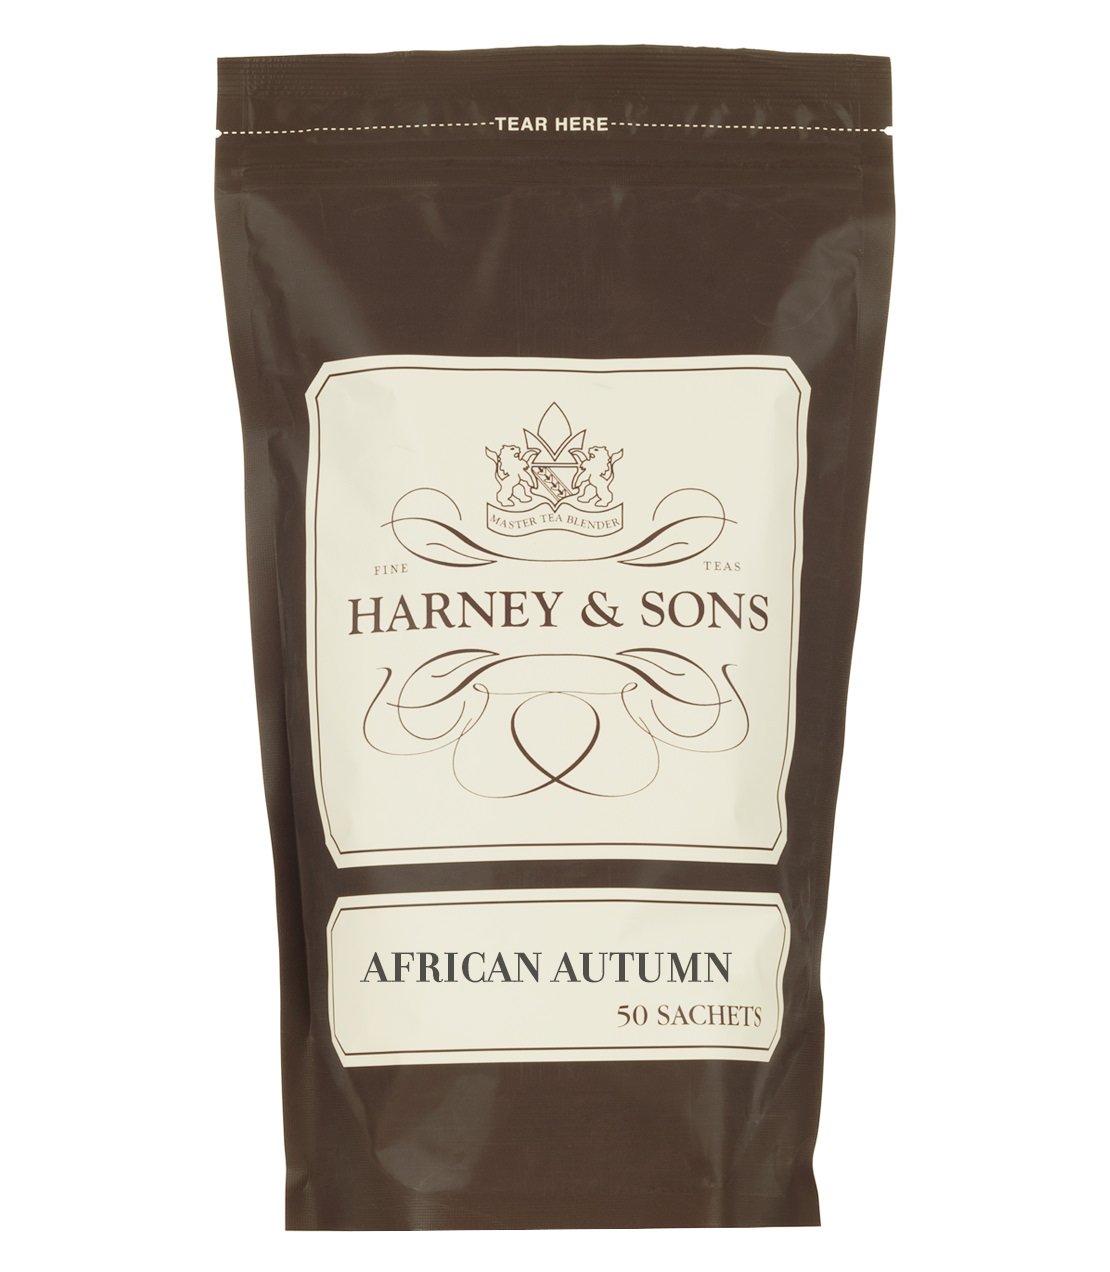 Rooibos flavoured orange and cranberry - African Autumn, bag of 50 sachets - Harney & Sons Fine Teas Europe